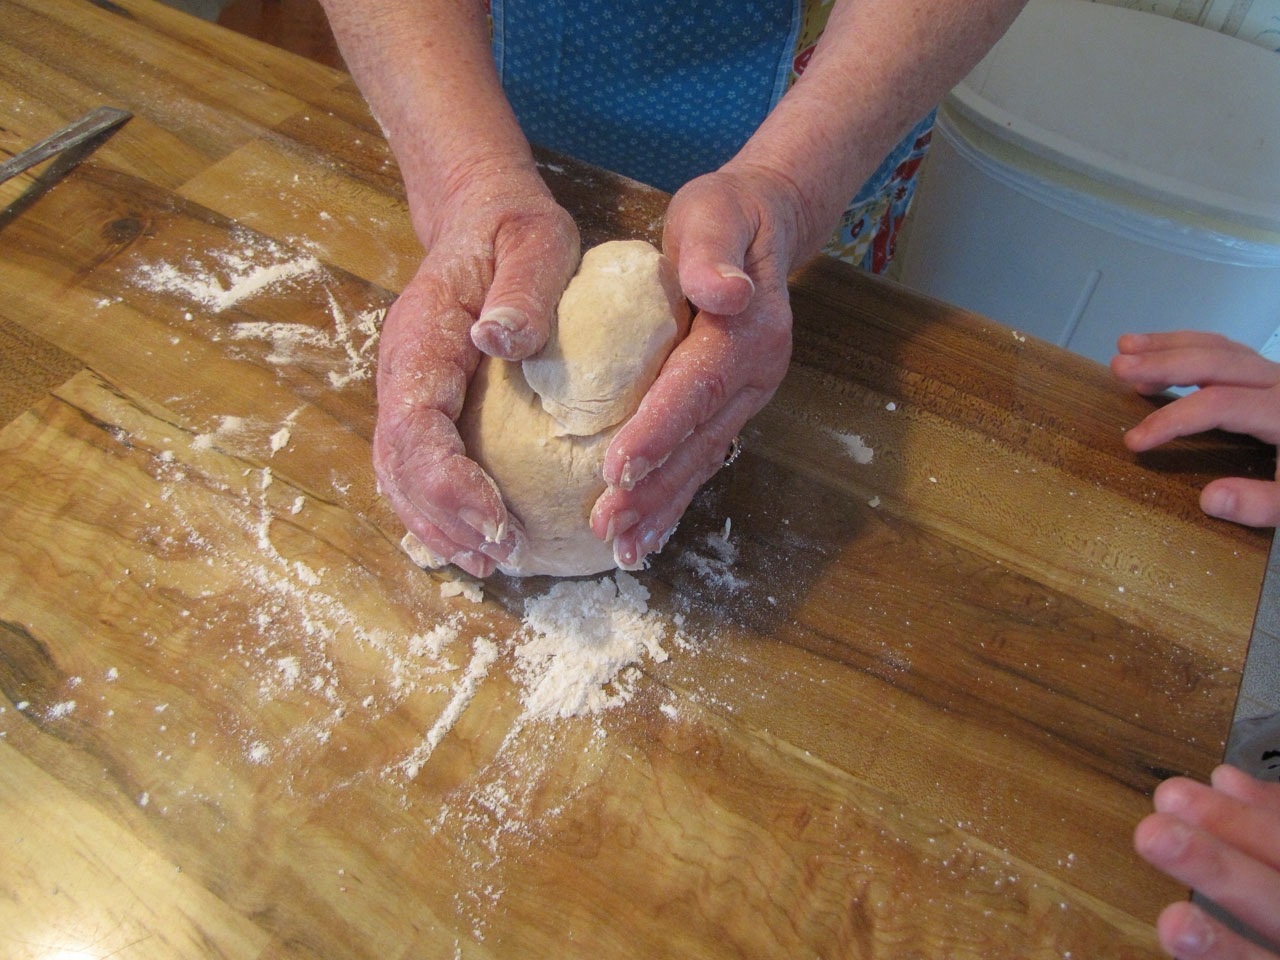 Press and form a ball with the dough